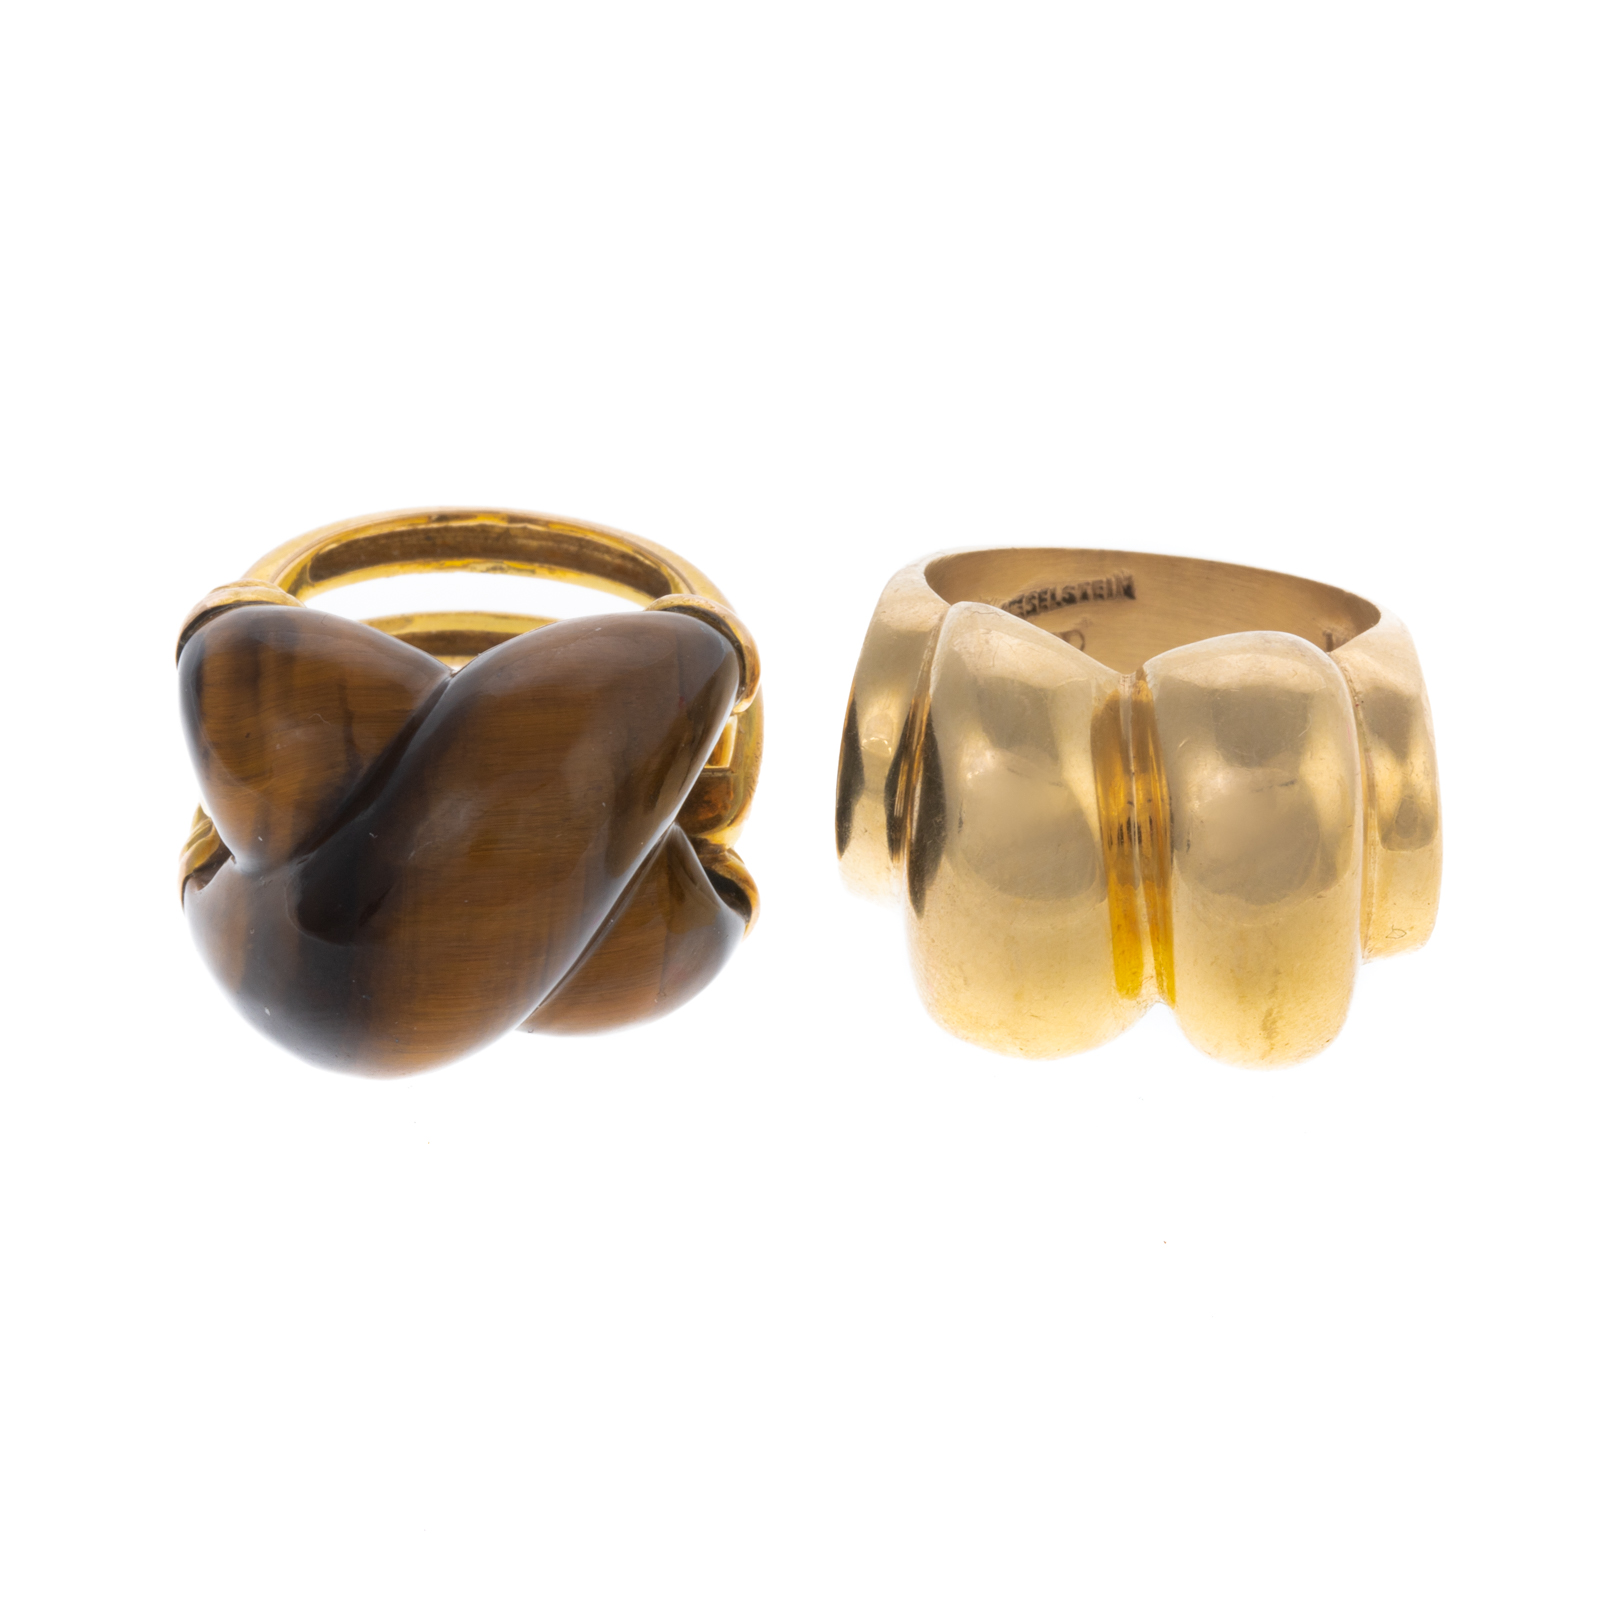 TWO BOLD RINGS IN 14K YELLOW GOLD